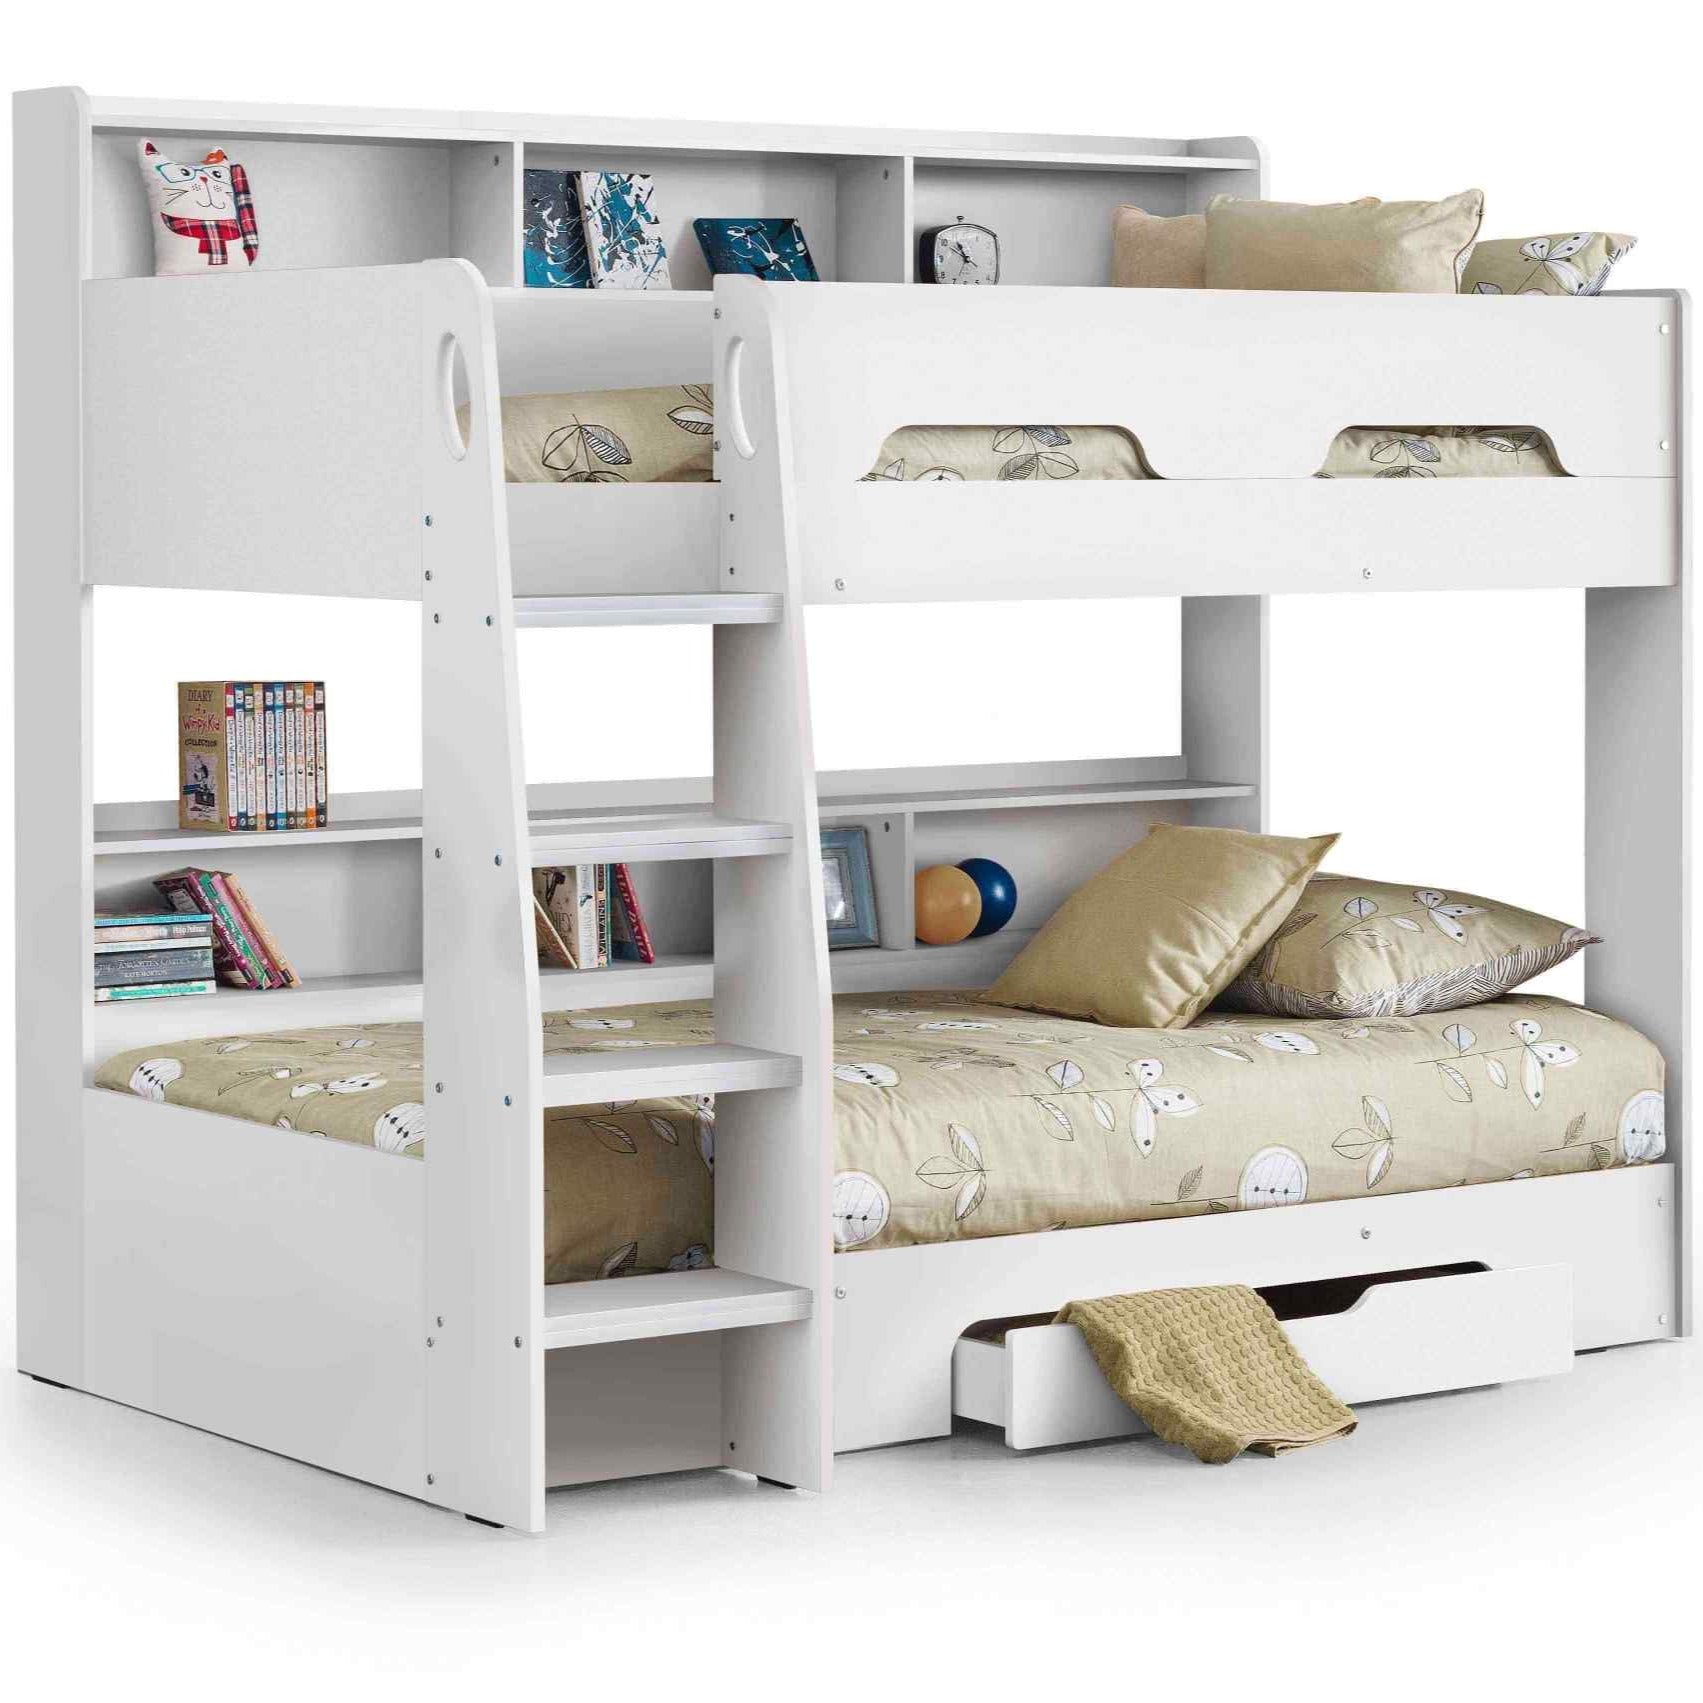 Orion bunk bed in white white background